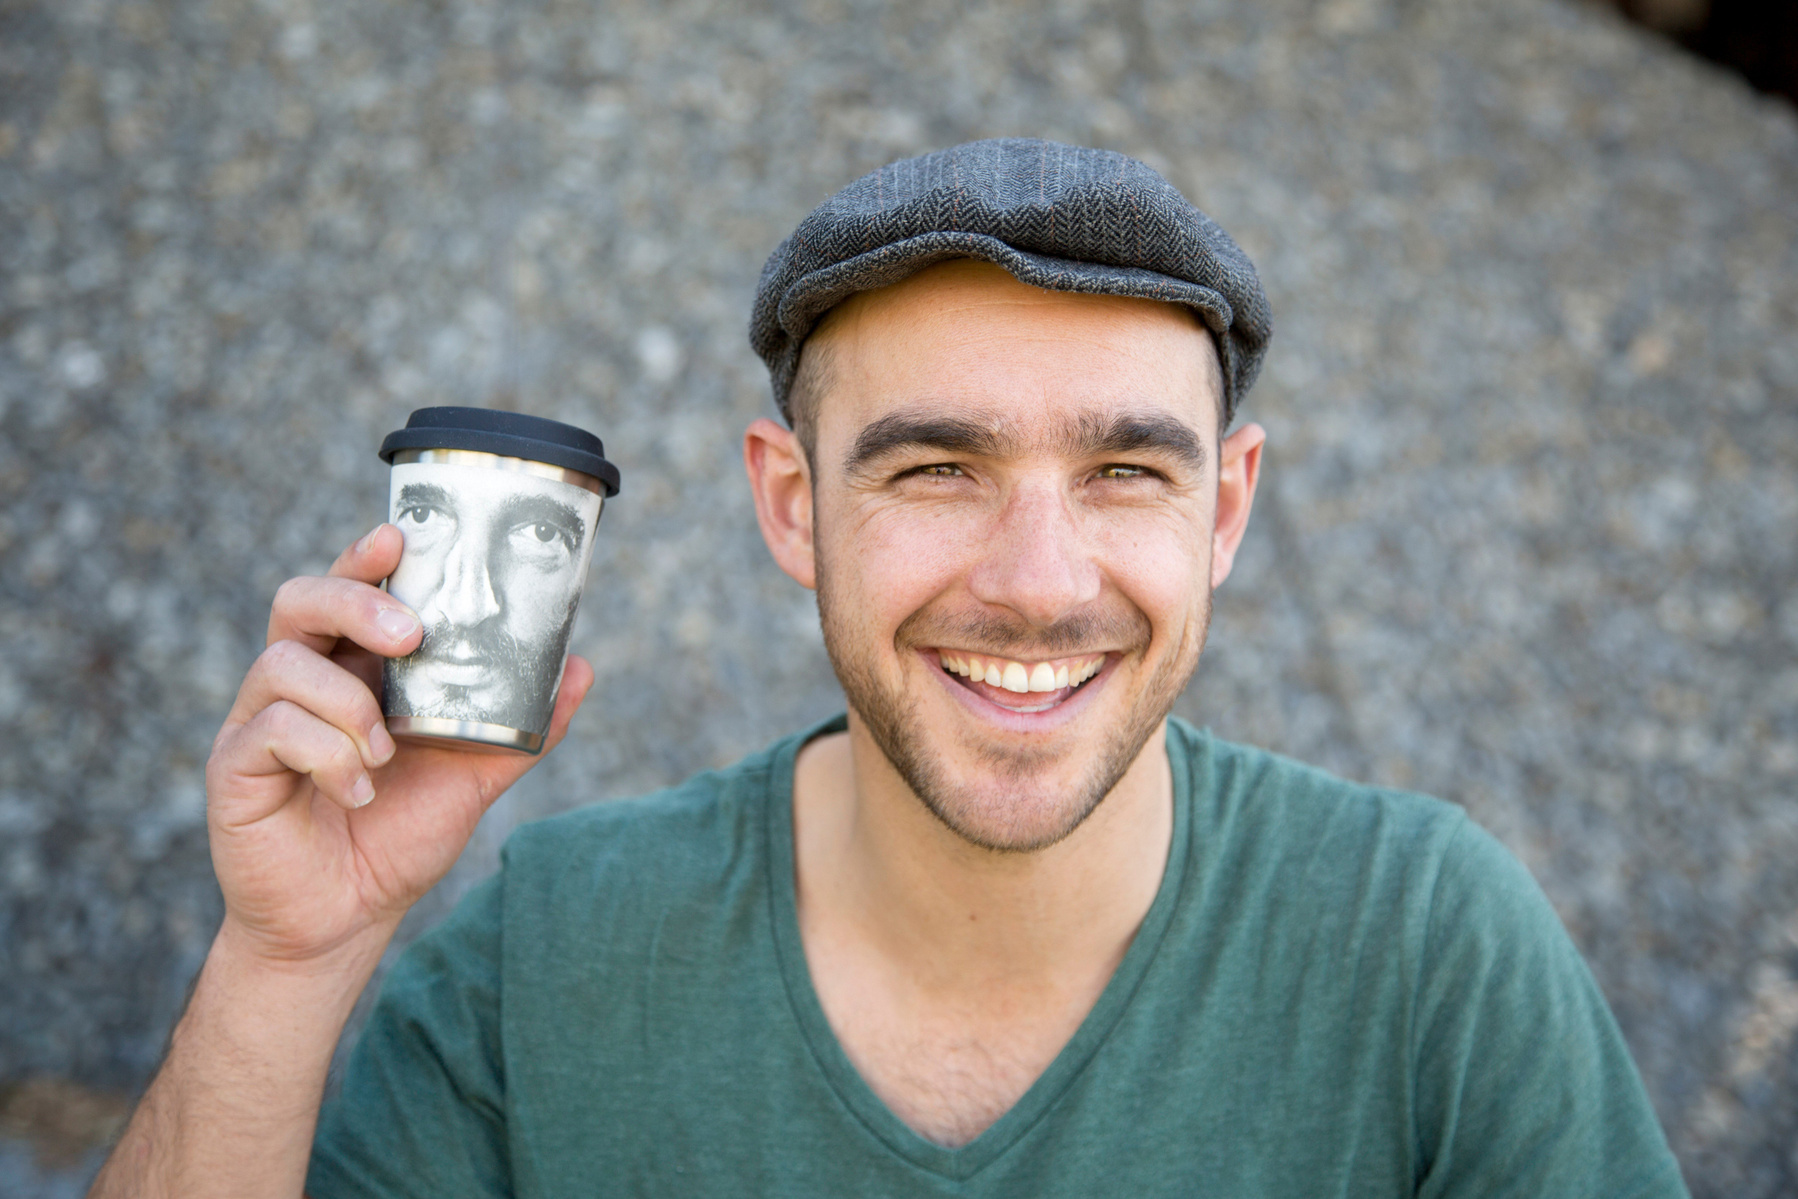 A man wearing a flat cap beams at the camera, holding a coffee cup level with his face to show that the cup is illustrated with a face